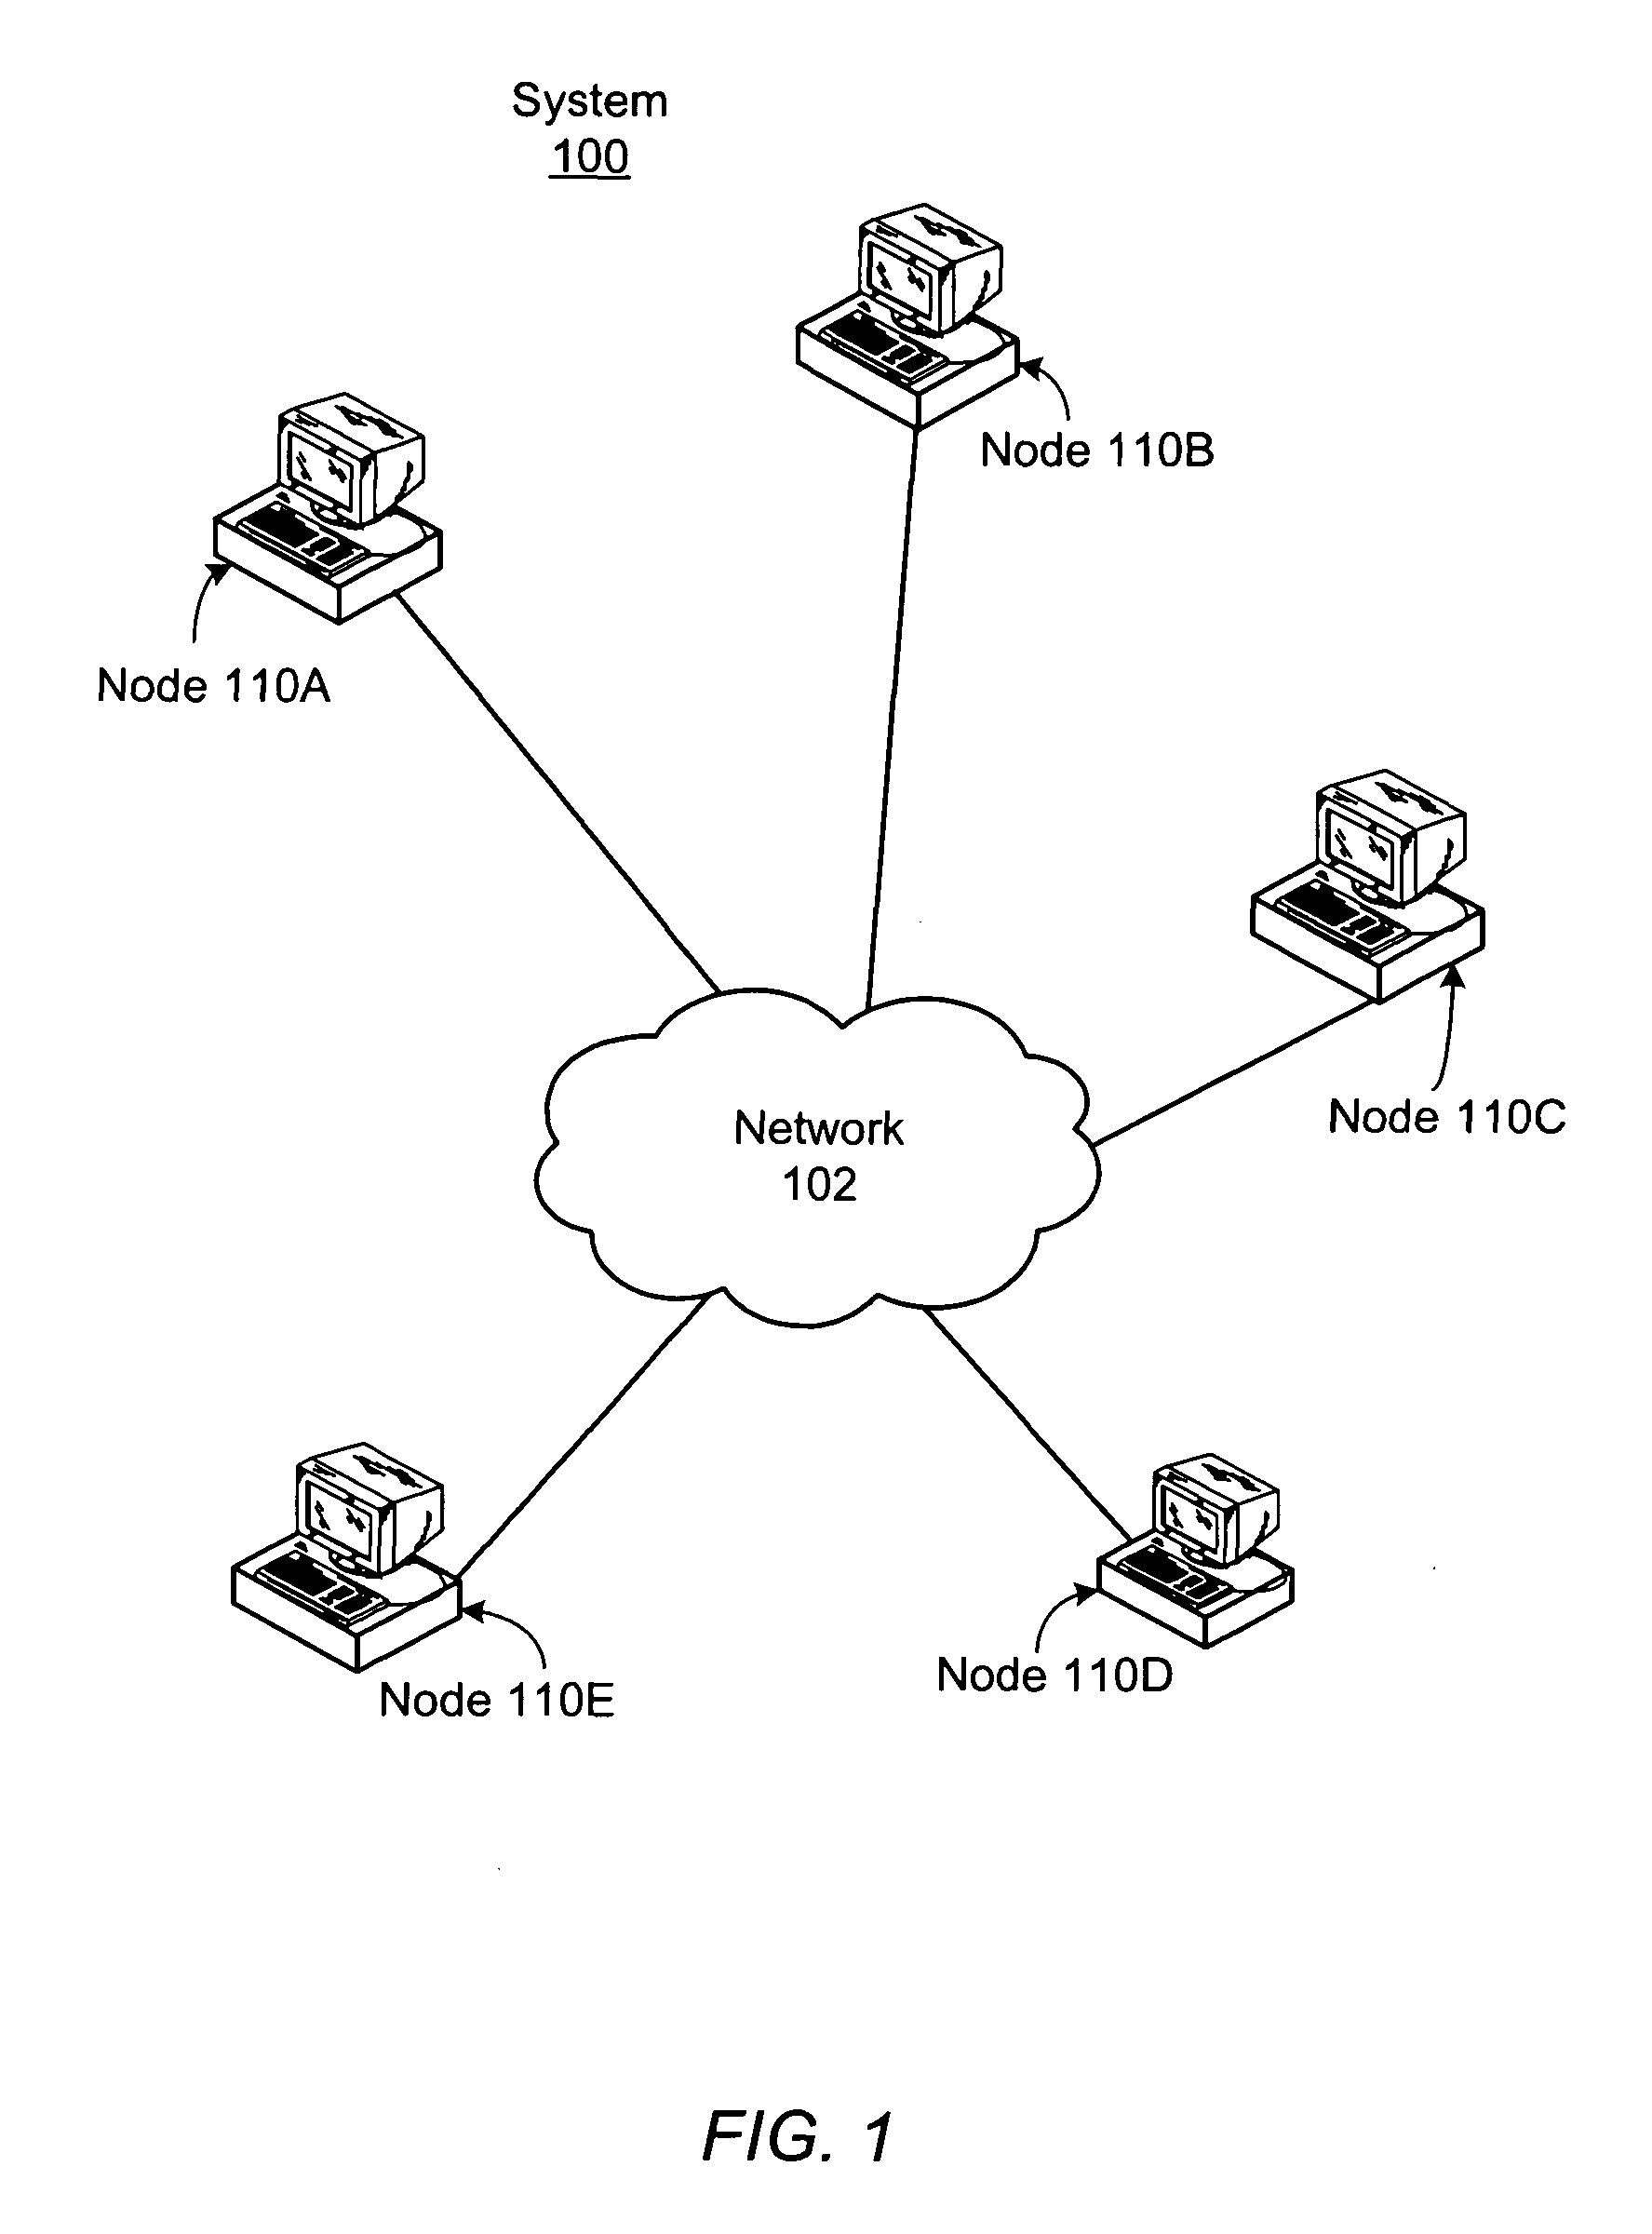 Conflict resolution for a distributed file sharing system